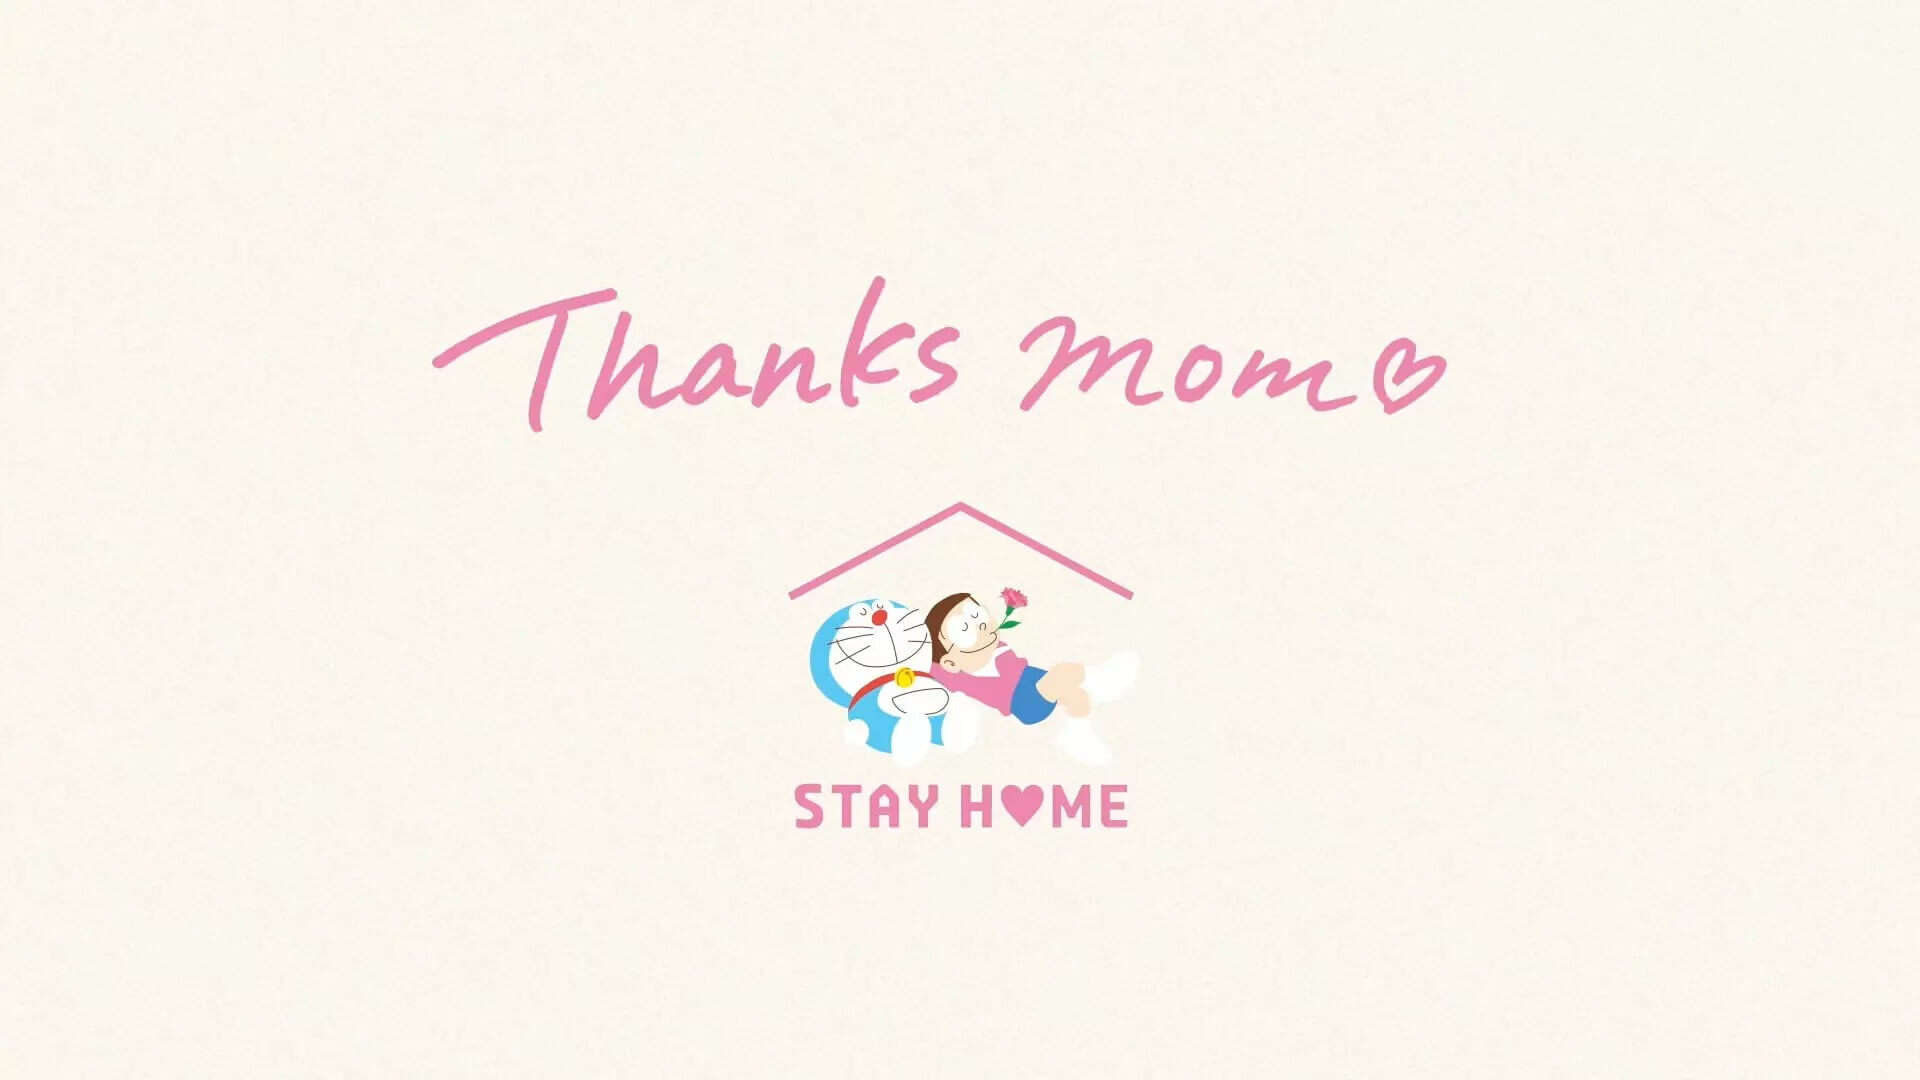 Movies / Shows / Music, Cute, Mother's Day, Simple, Stylish / Fashionable, Casual, Illustration Banner Designs